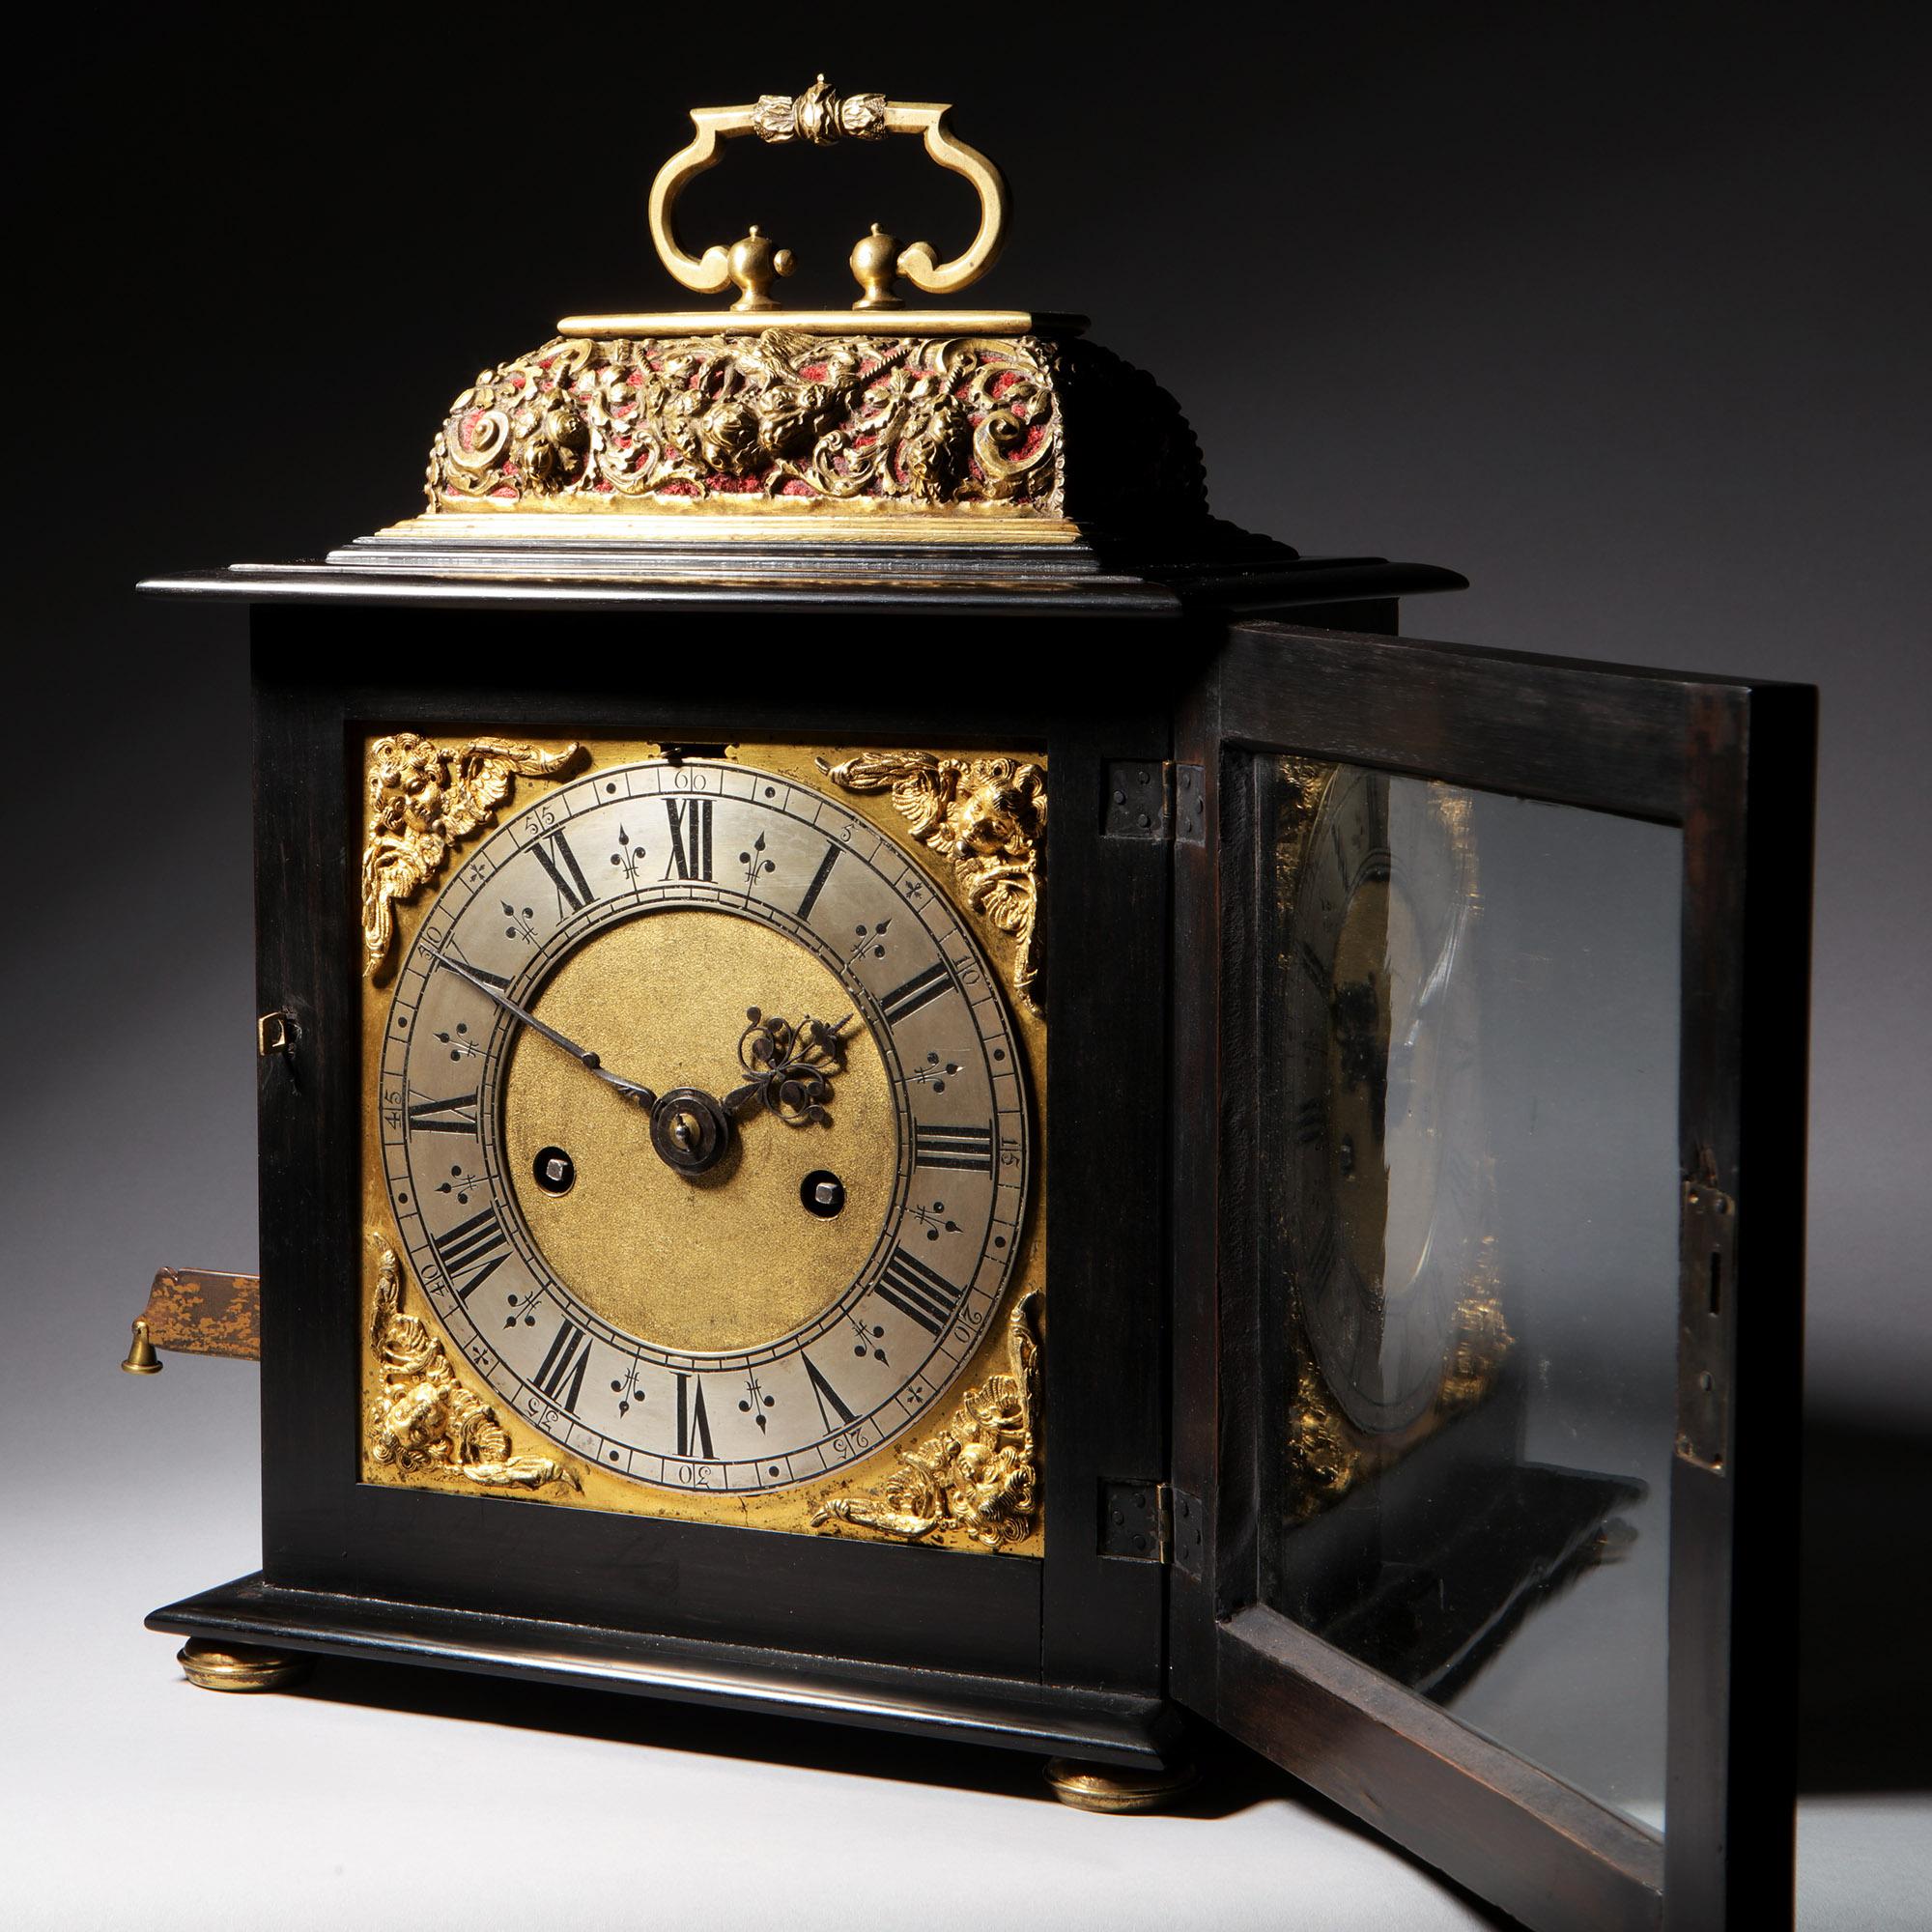 A Rare and Important Charles II 17th Century Table Clock by Henry Jones In Good Condition For Sale In Oxfordshire, United Kingdom